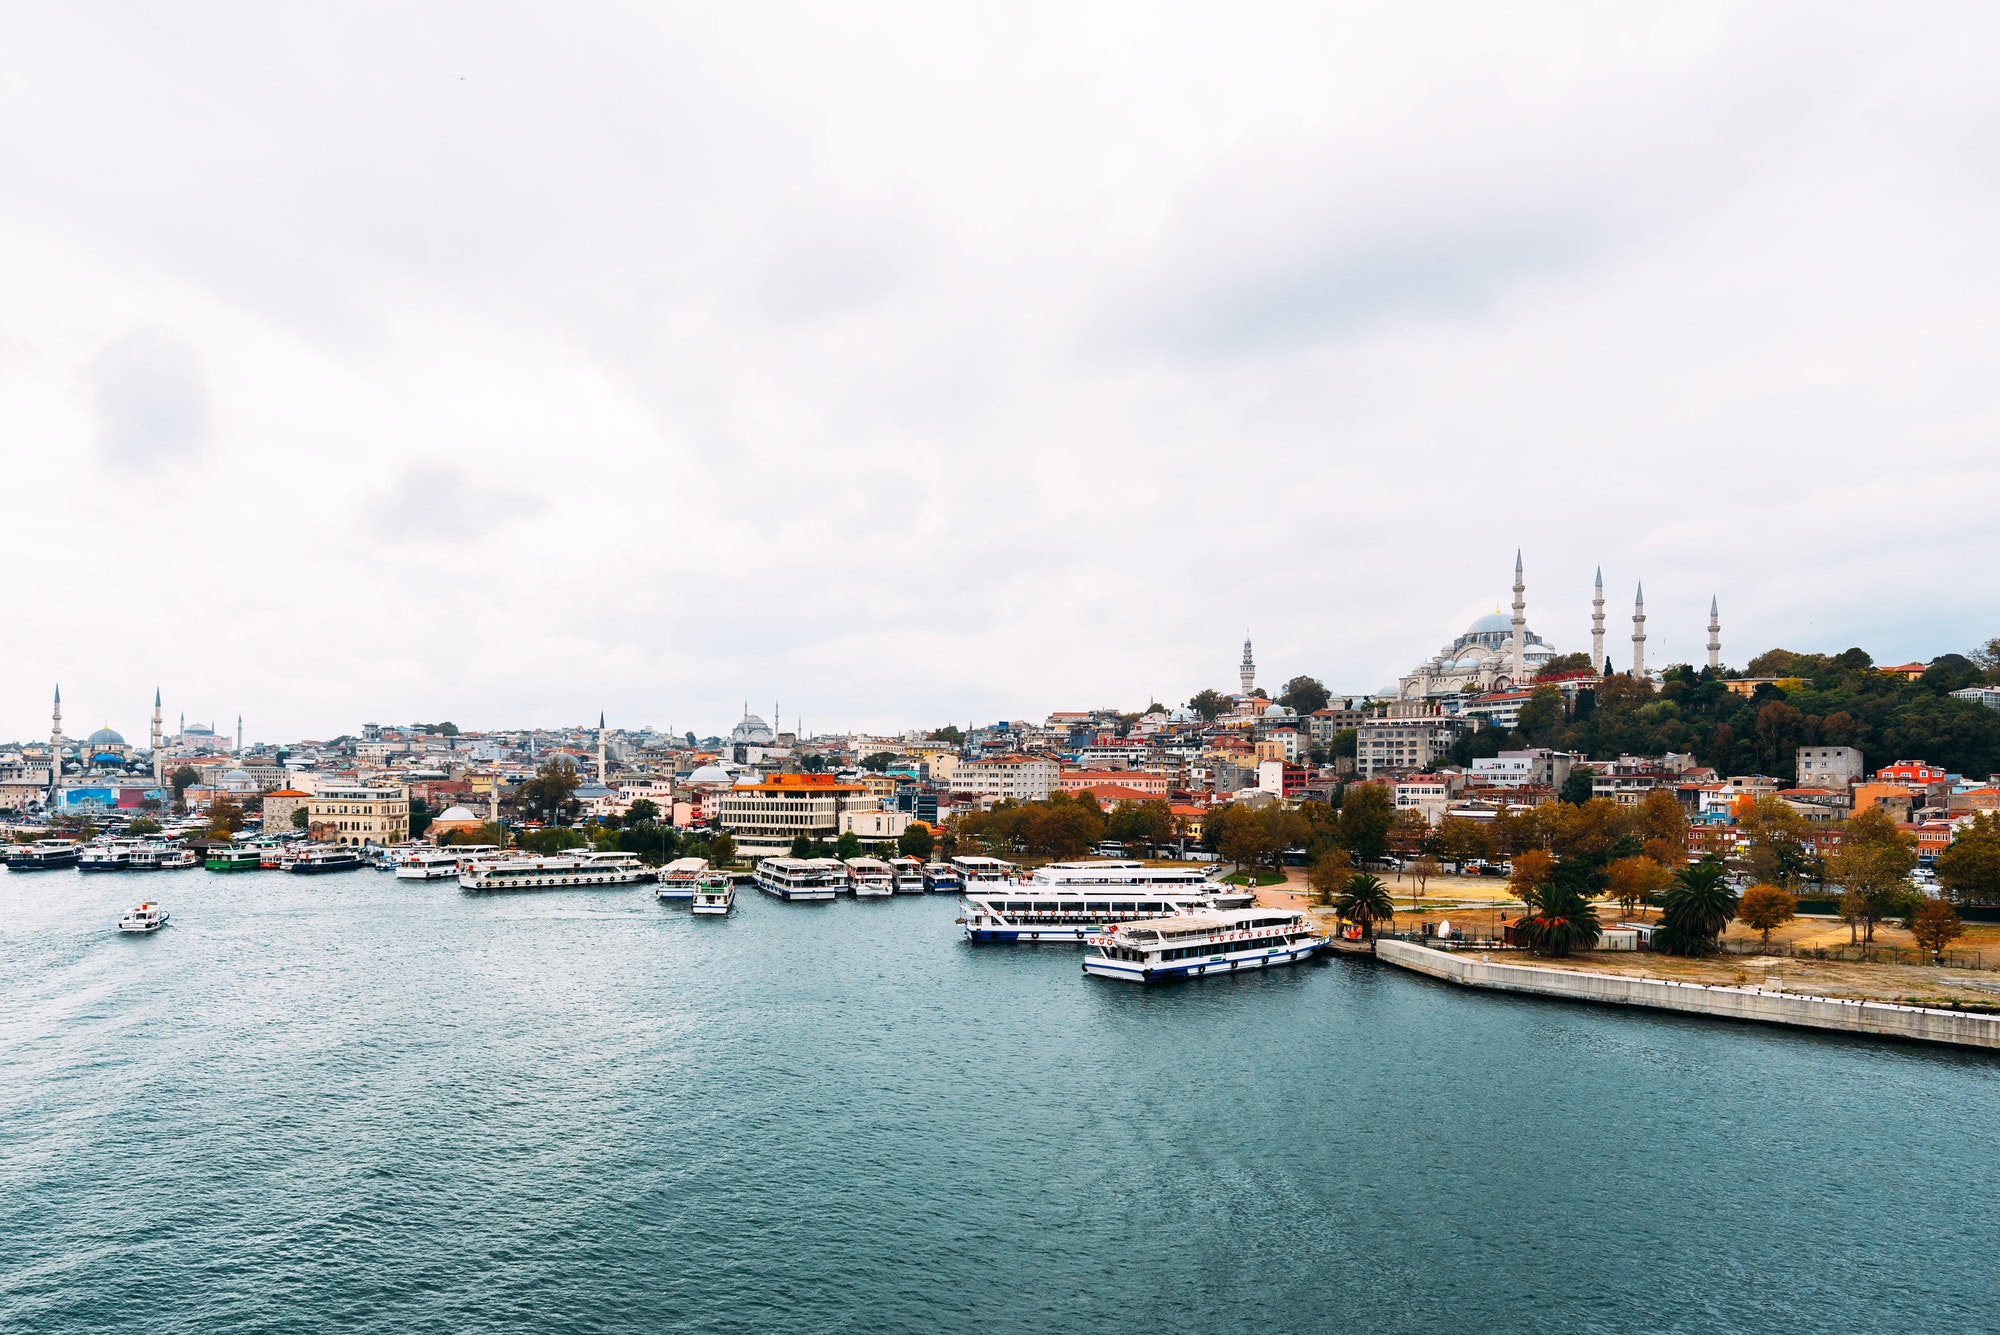 City Istanbul. Istanbul daytime landscape. View of the city